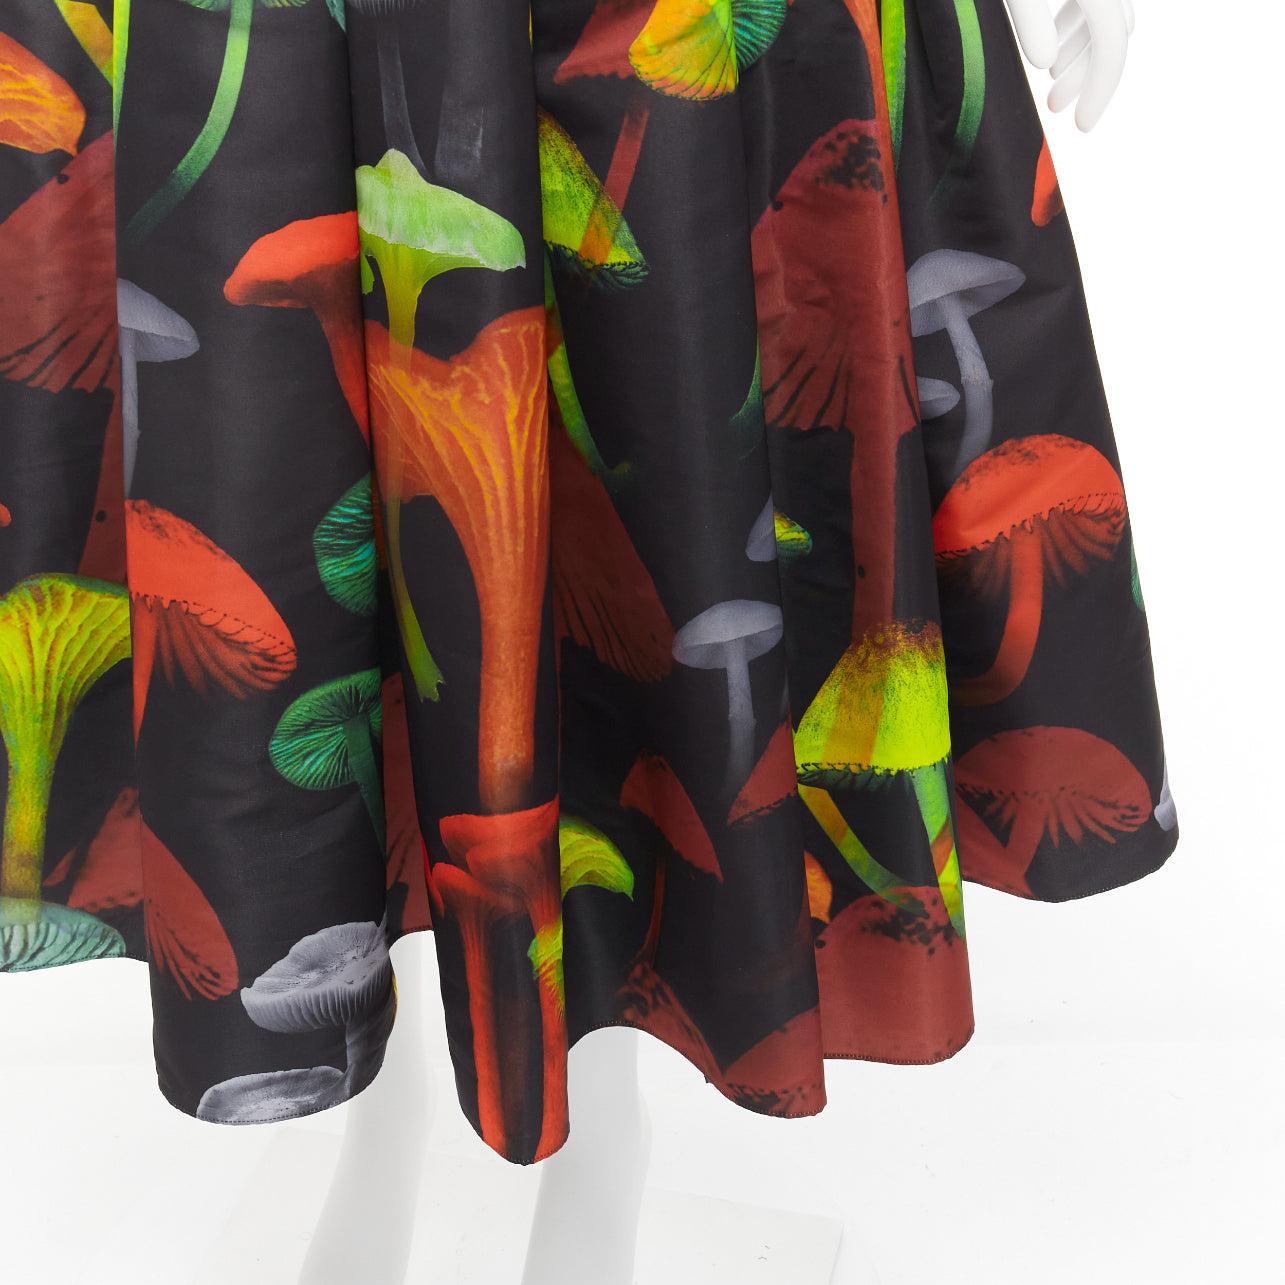 ALEXANDER MCQUEEN 2022 black Psychedelic Mushroom print midi full skirt IT38 XS
Reference: AAWC/A00600
Brand: Alexander McQueen
Designer: Sarah Burton
Collection: 2022
Material: Polyester
Color: Black, Multicolour
Pattern: Solid
Closure: Zip
Extra